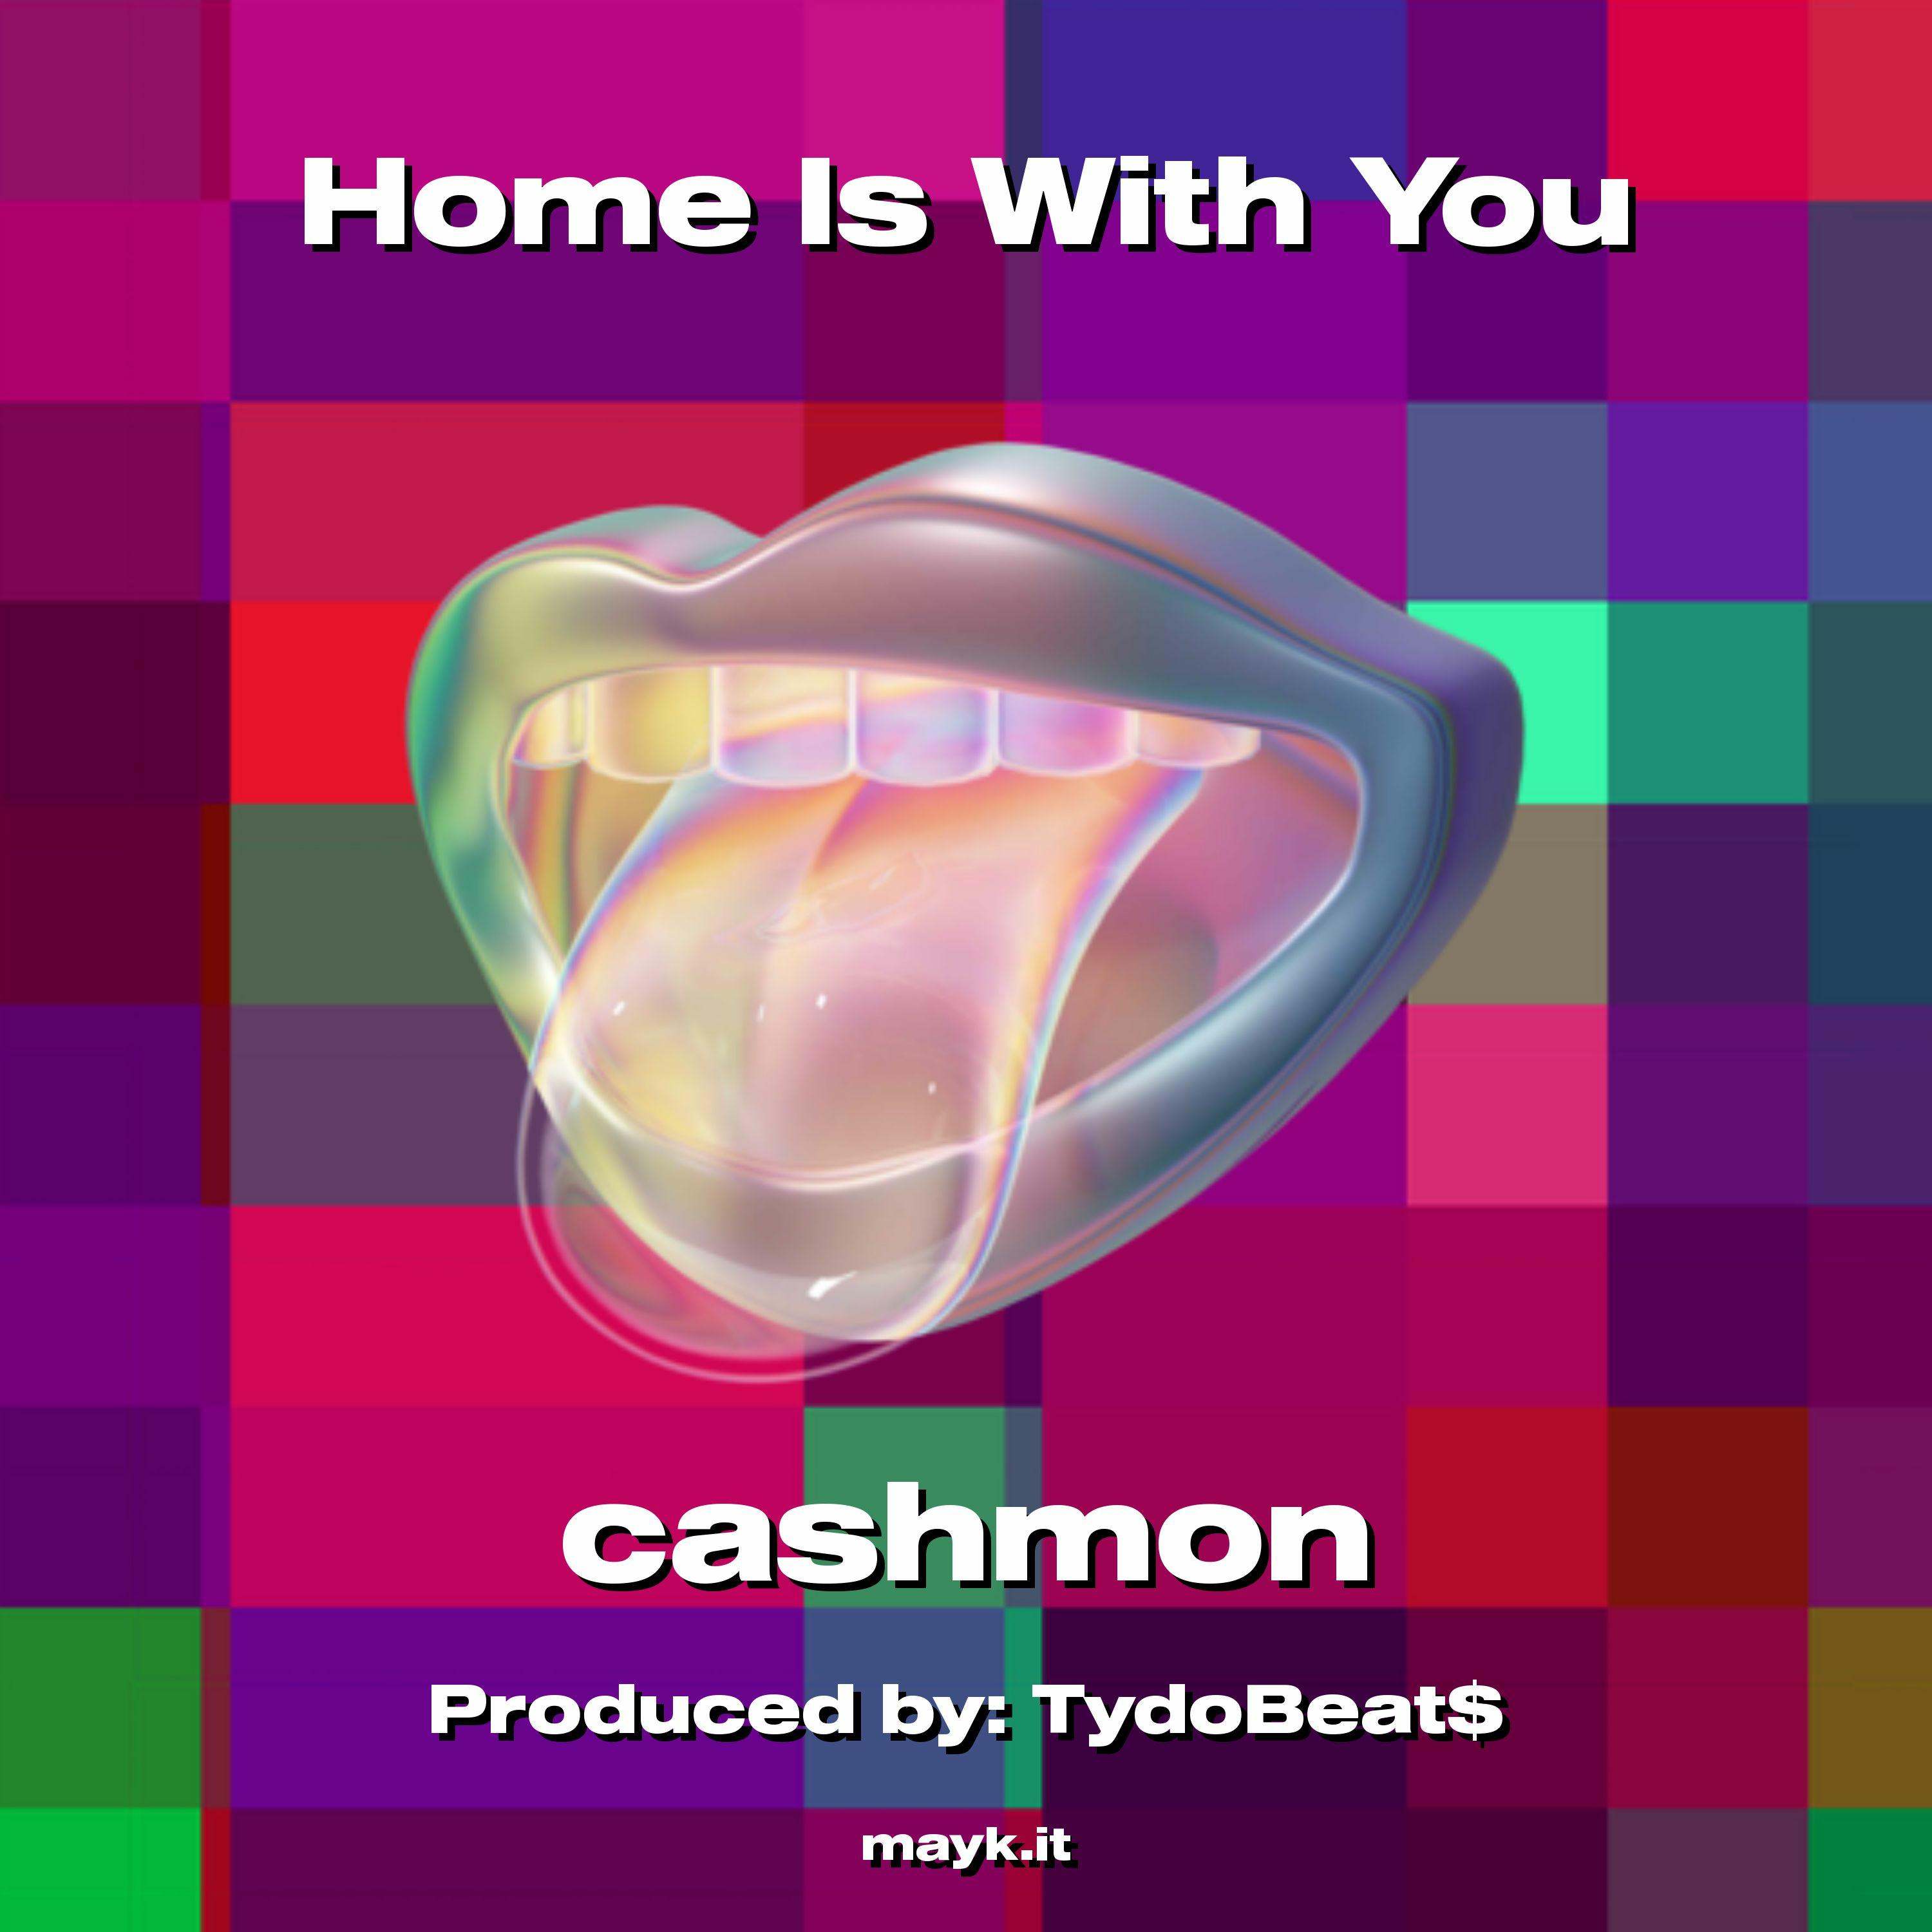 CashMon - Home Is With You 1